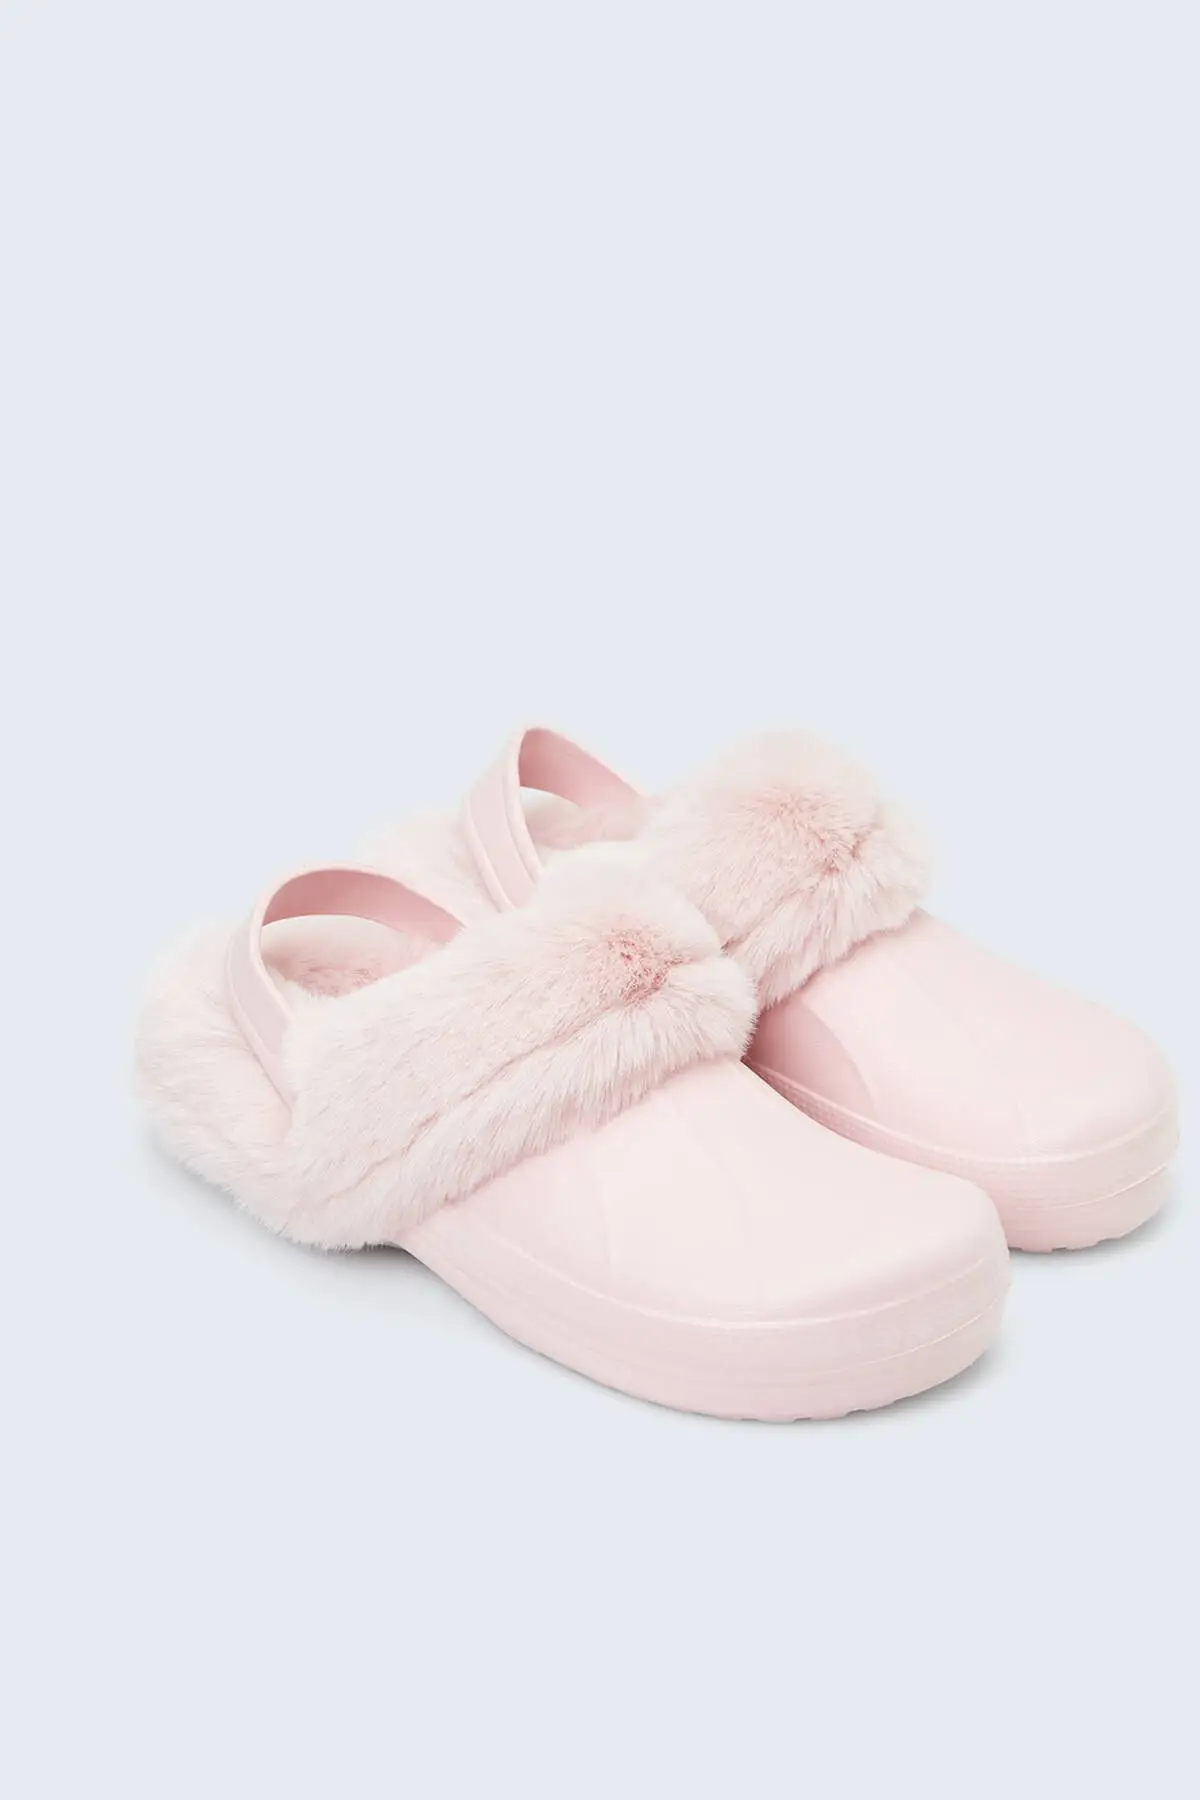 

Women's Pink Removable Furry Slippers Welcome Design Quality Product Interests Attractive Useful Stylish 2021 Trend Style Fashion New Model Slippers Stylish And Sweet Home Slippers For Women